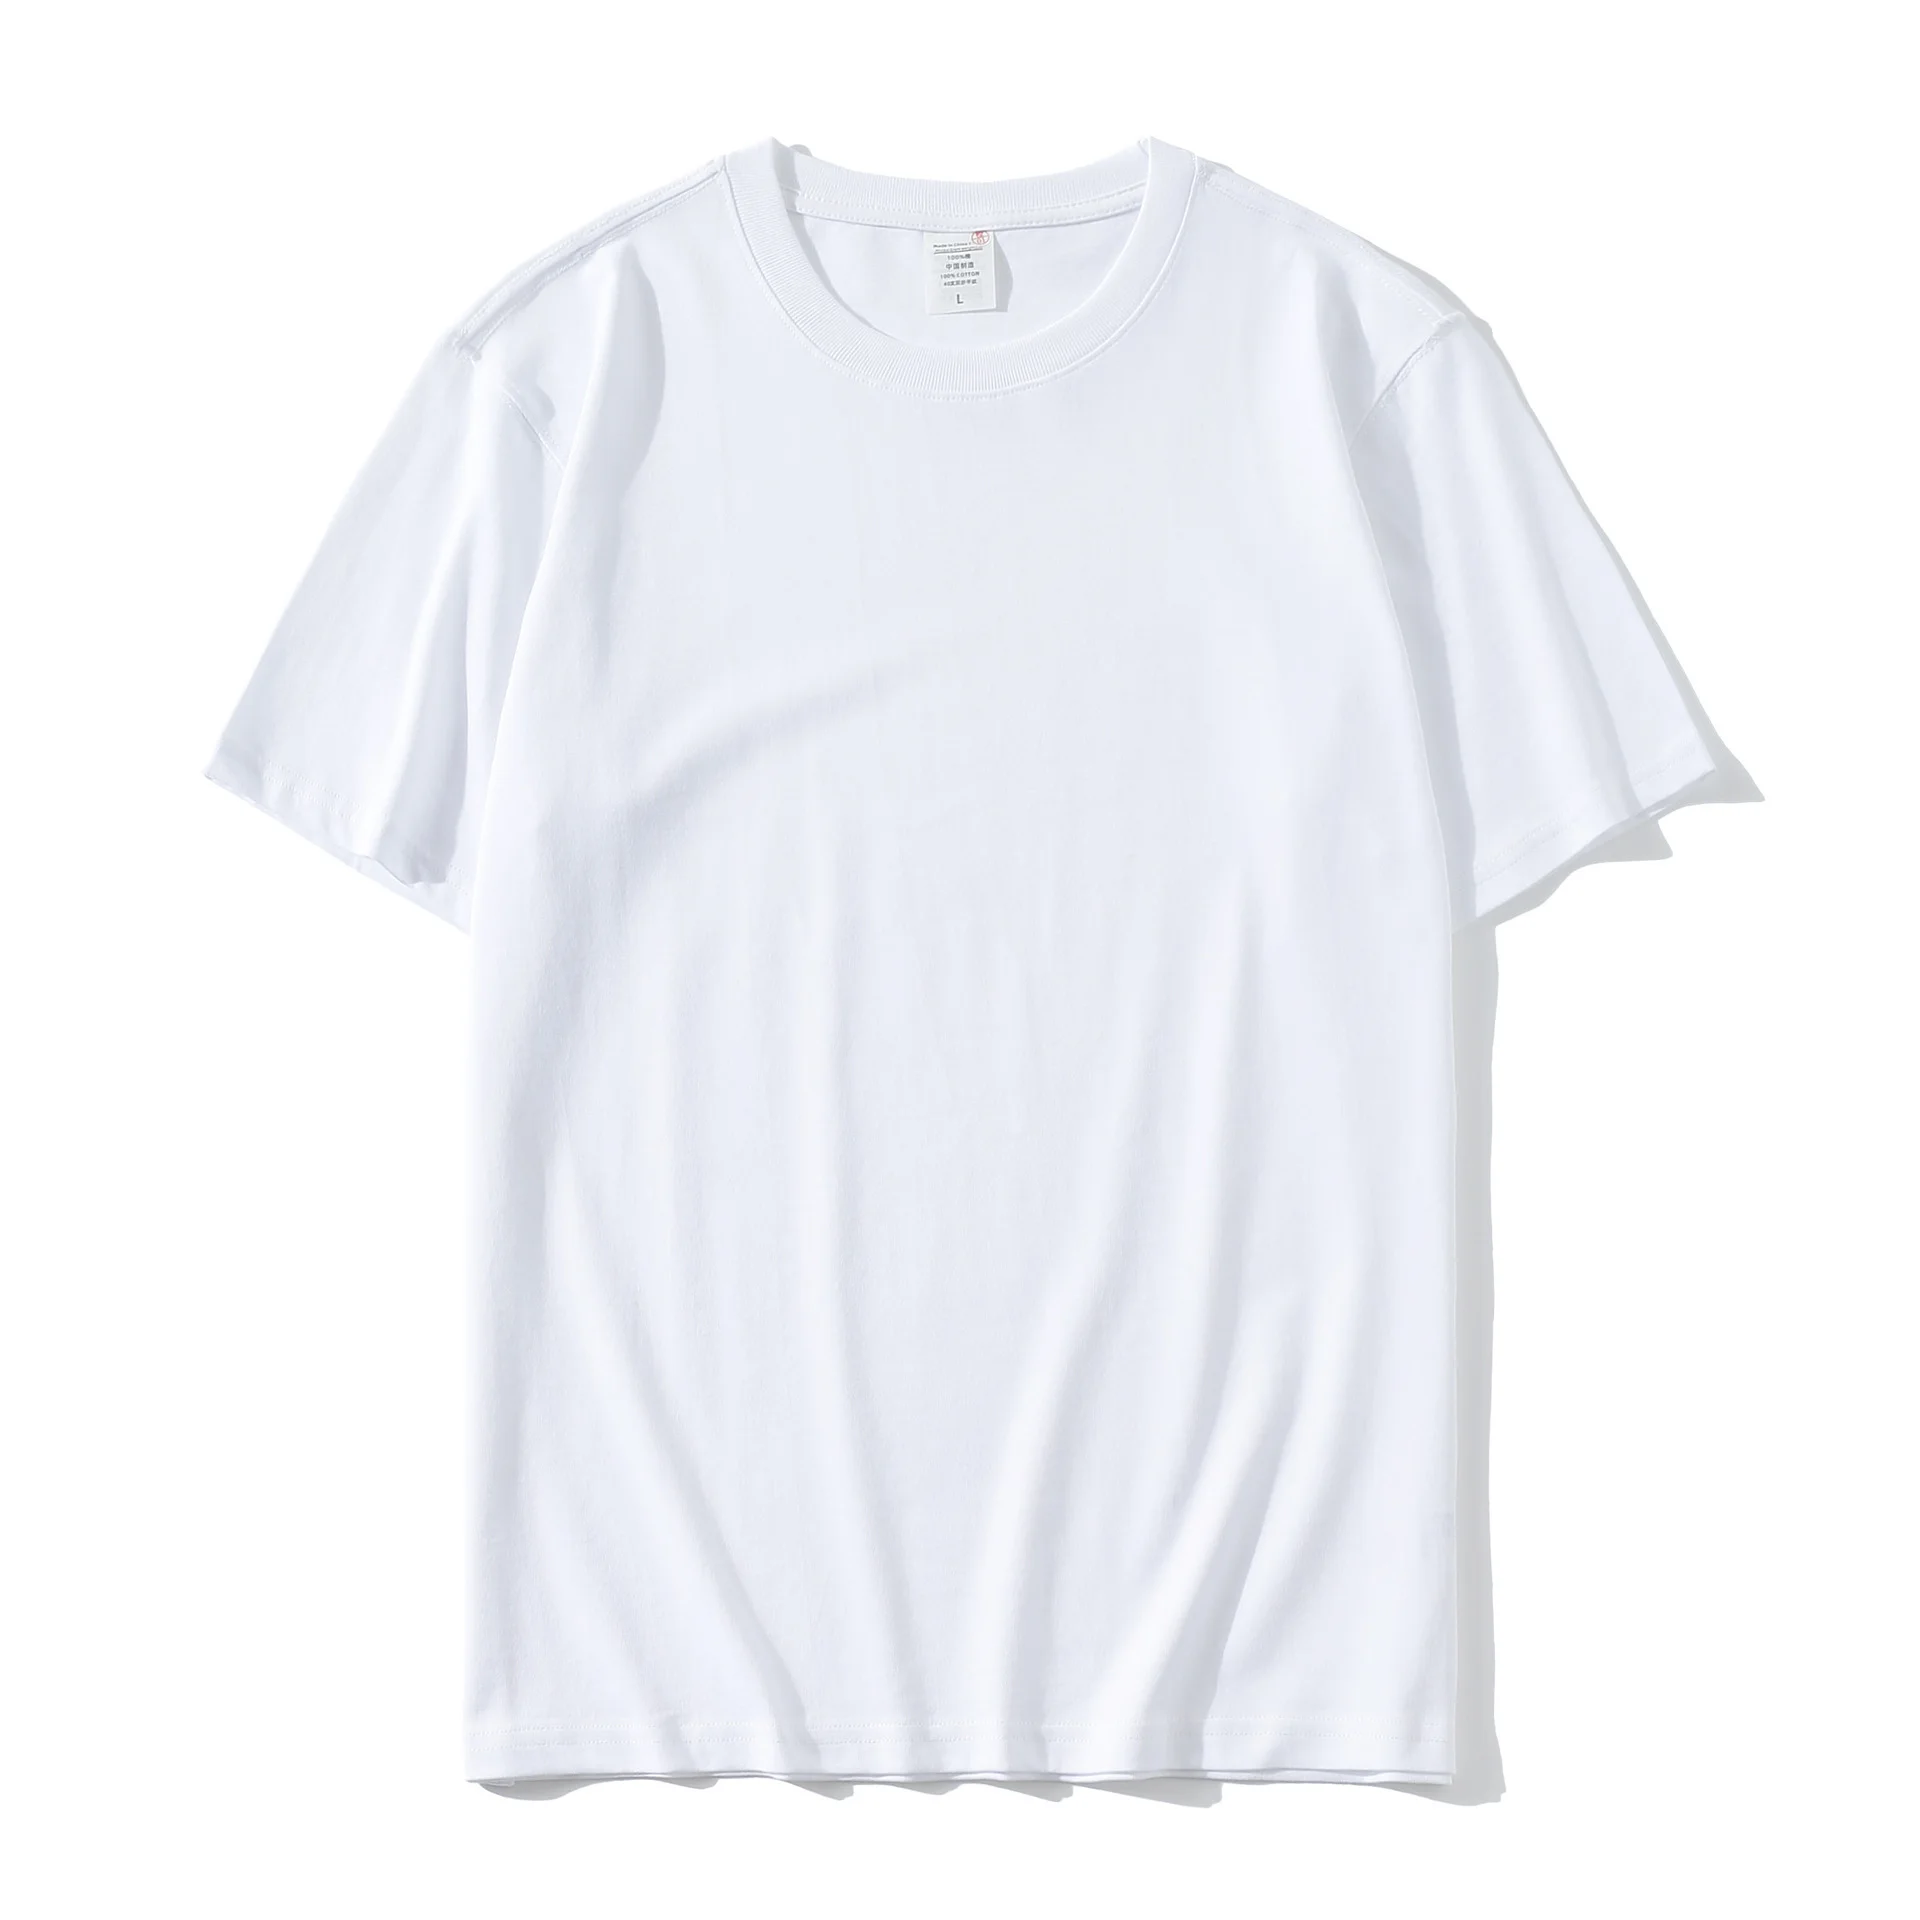 Wholesale Blank T shirts for Printing in Mezhdurechensk